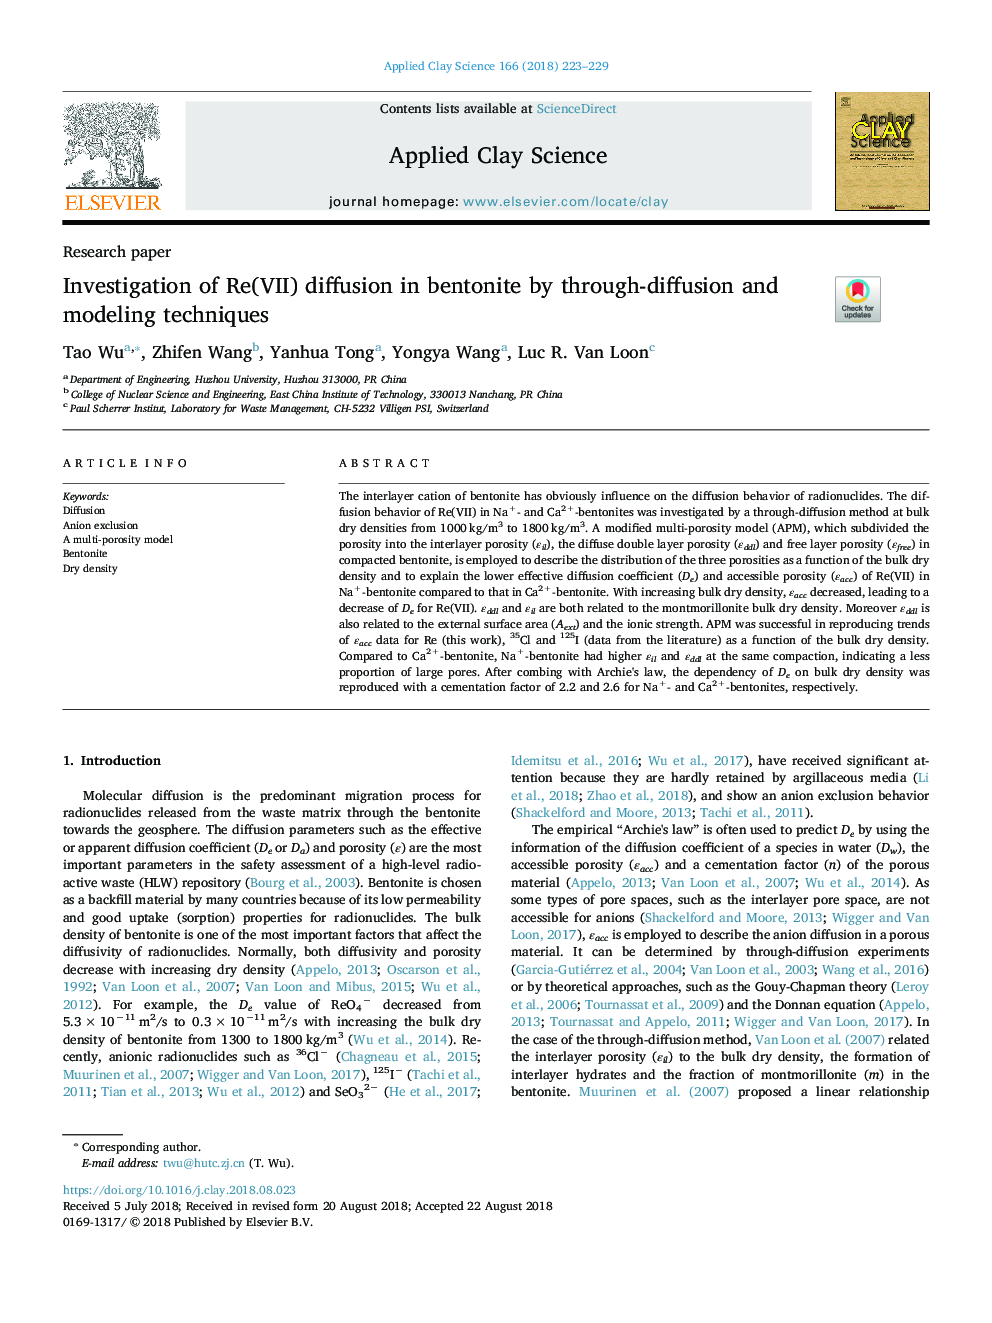 Investigation of Re(VII) diffusion in bentonite by through-diffusion and modeling techniques